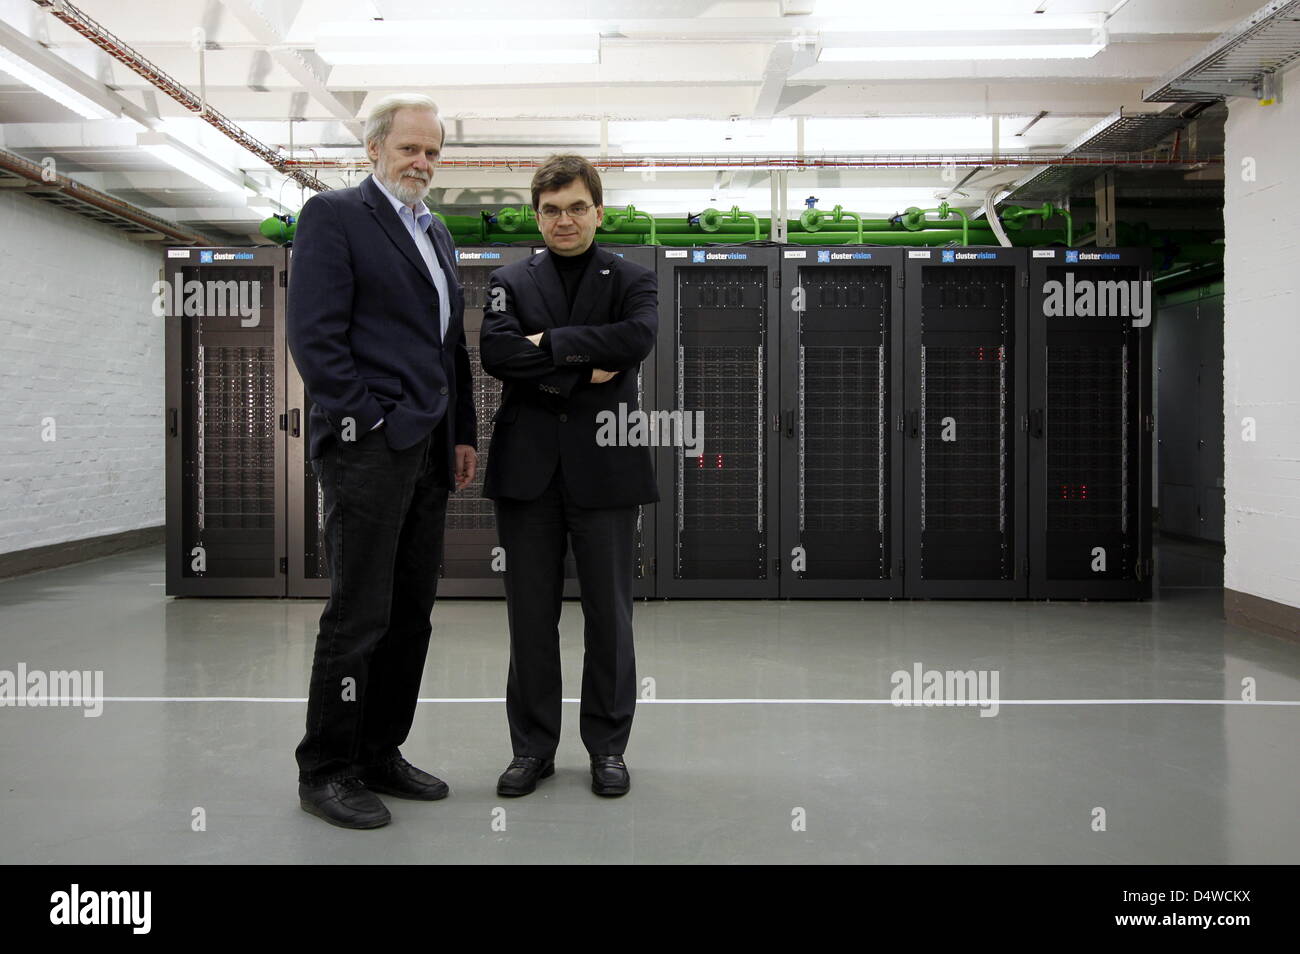 A handout picture from 19 November 2010 shows the developers of the new supercomputer LOEWE-CSC, Volker Lindenstruth (r) and Hans Juergen Luedde, at the Center for Scientific Computing which is part of Goethe University in Frankfurt, Germany. Germany's second fastest computer with an output of 285 billions of arithmetic operations per second has been commissioned in Frankfurt. It h Stock Photo